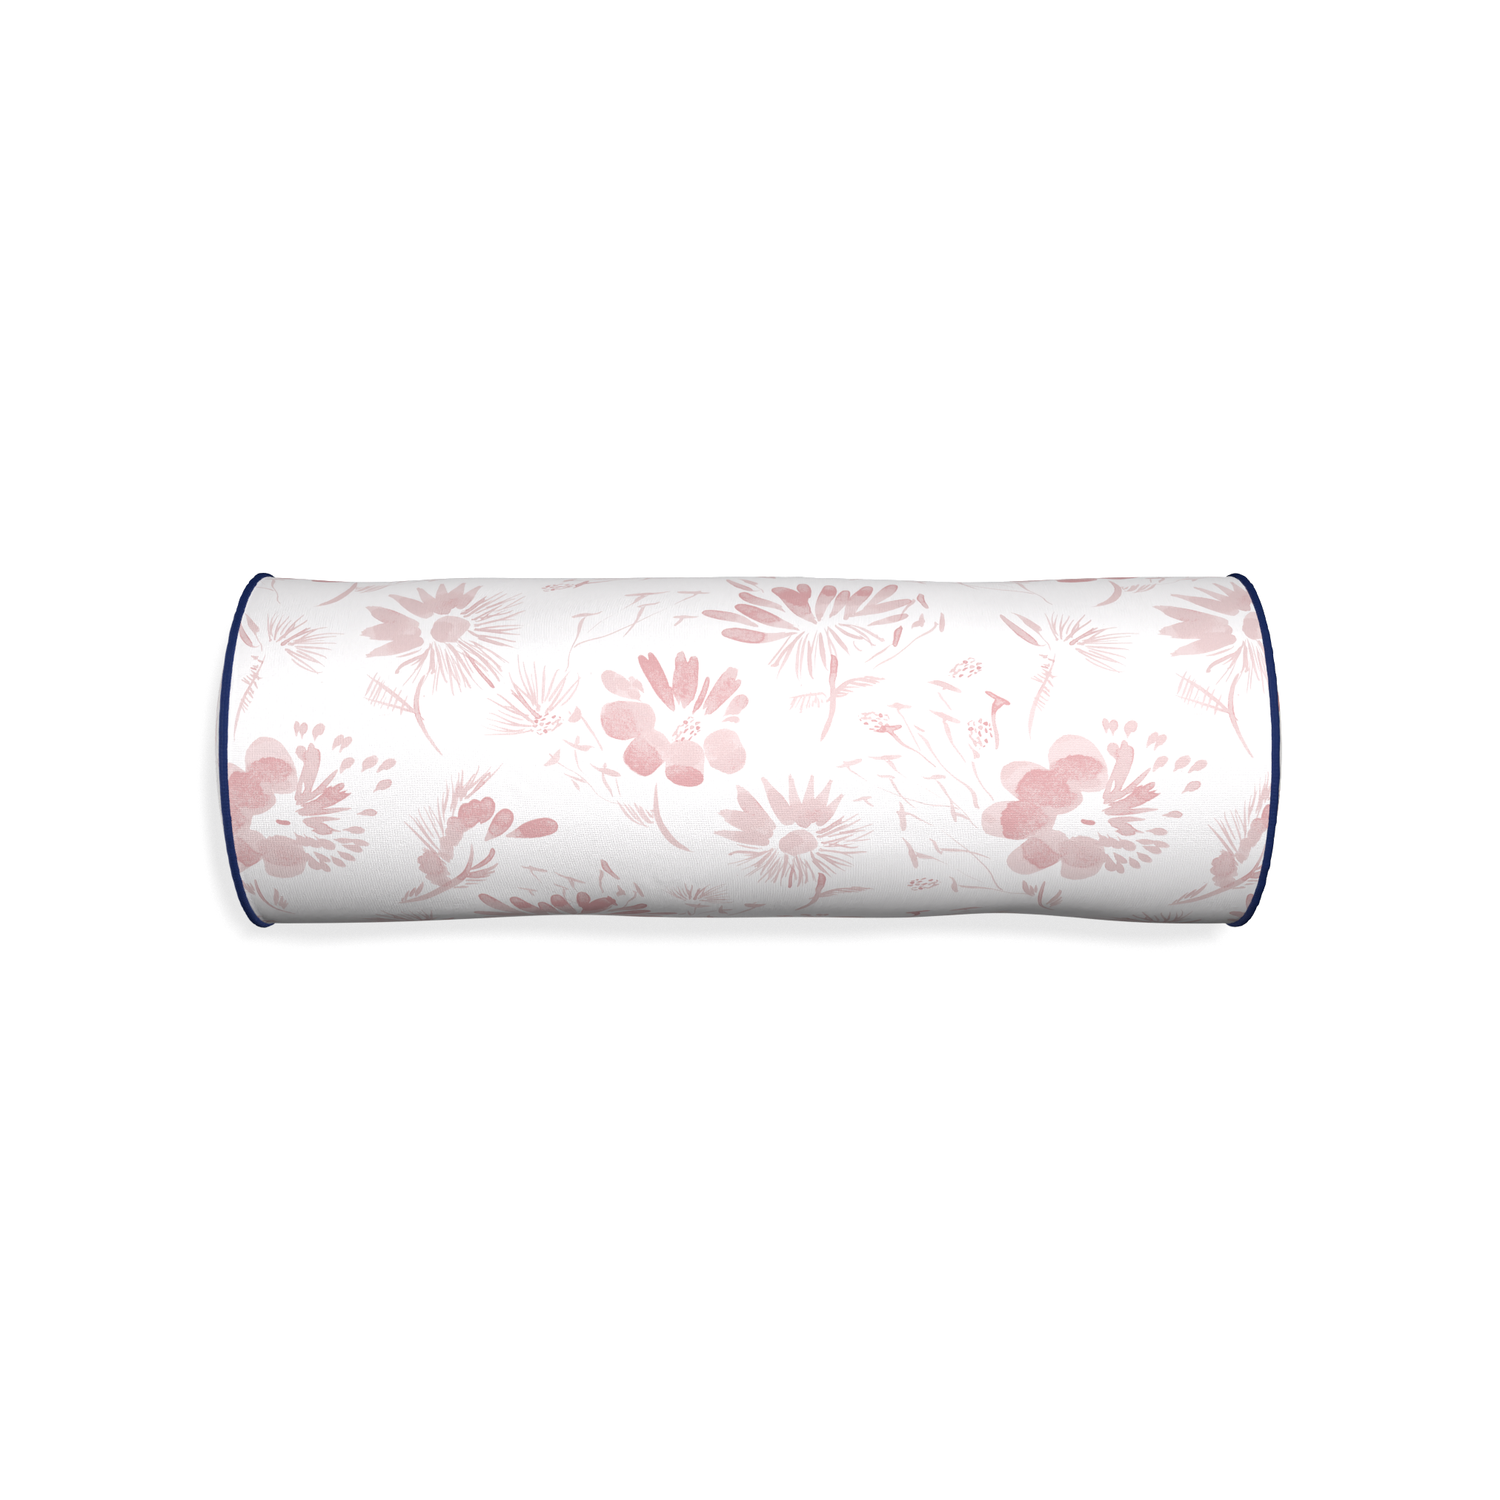 Bolster blake custom pink floralpillow with midnight piping on white background